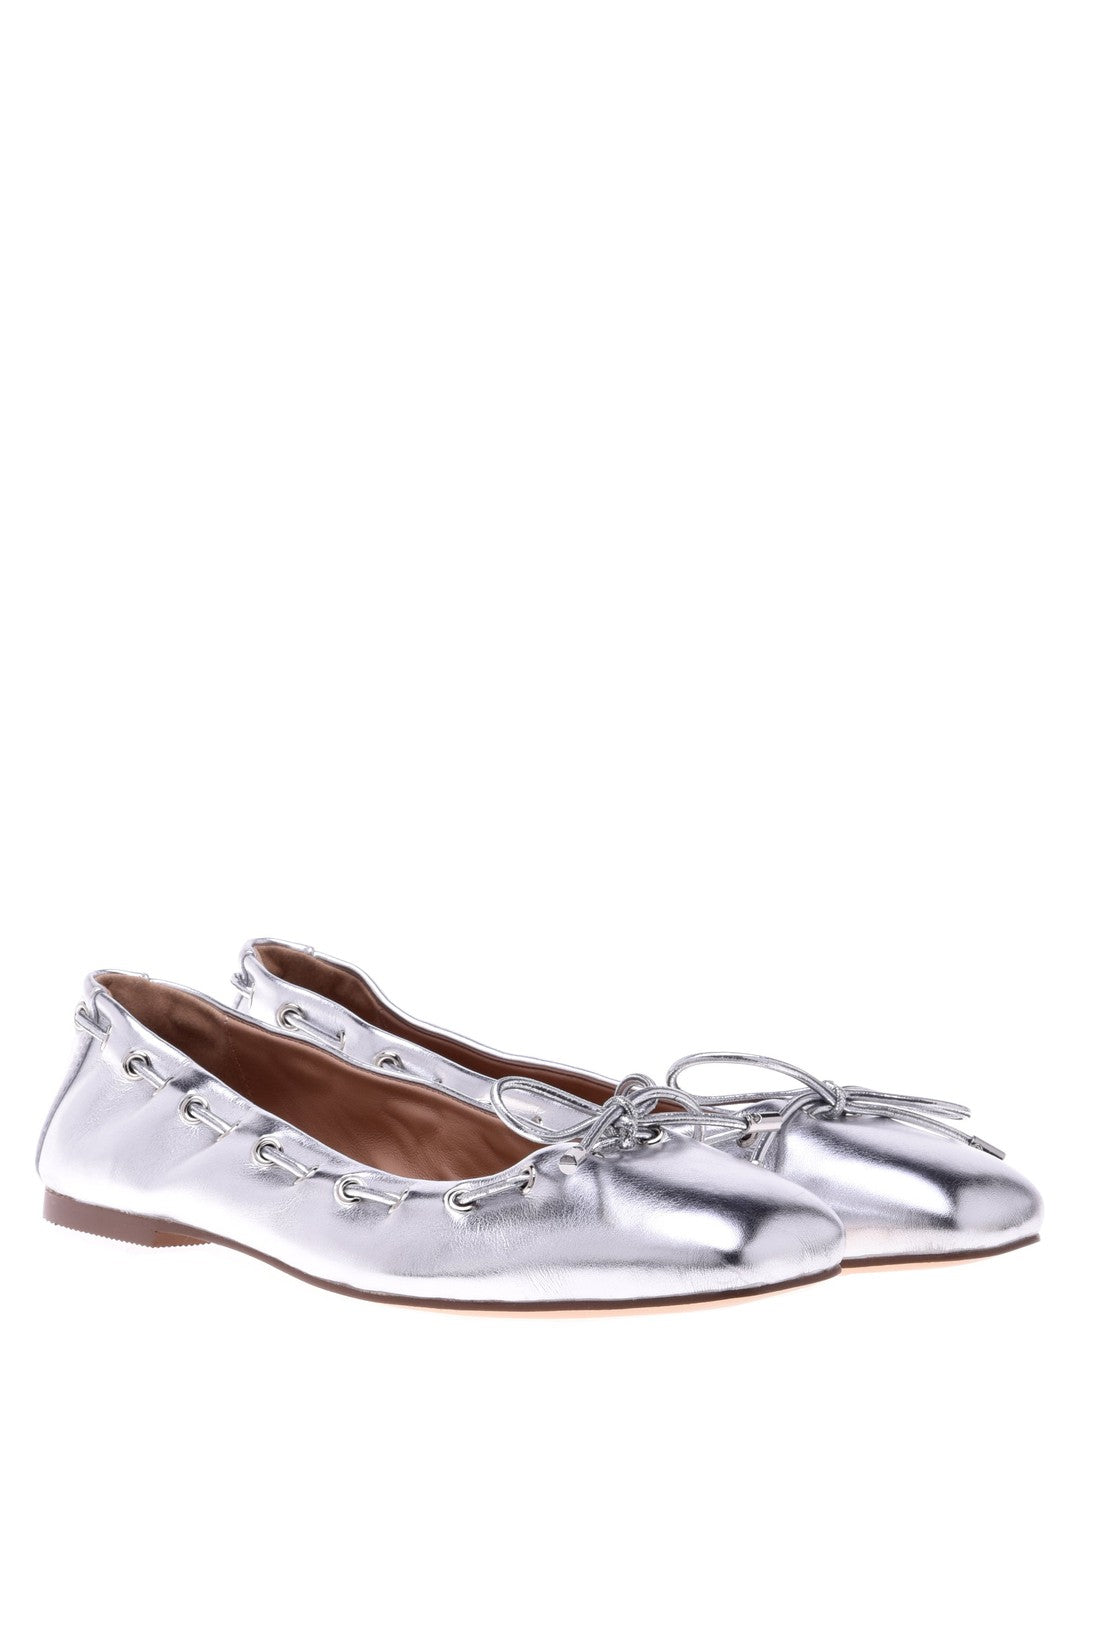 BALDININI-OUTLET-SALE-Ballerina-pump-in-silver-laminated-nappa-leather-Halbschuhe-ARCHIVE-COLLECTION-3.jpg